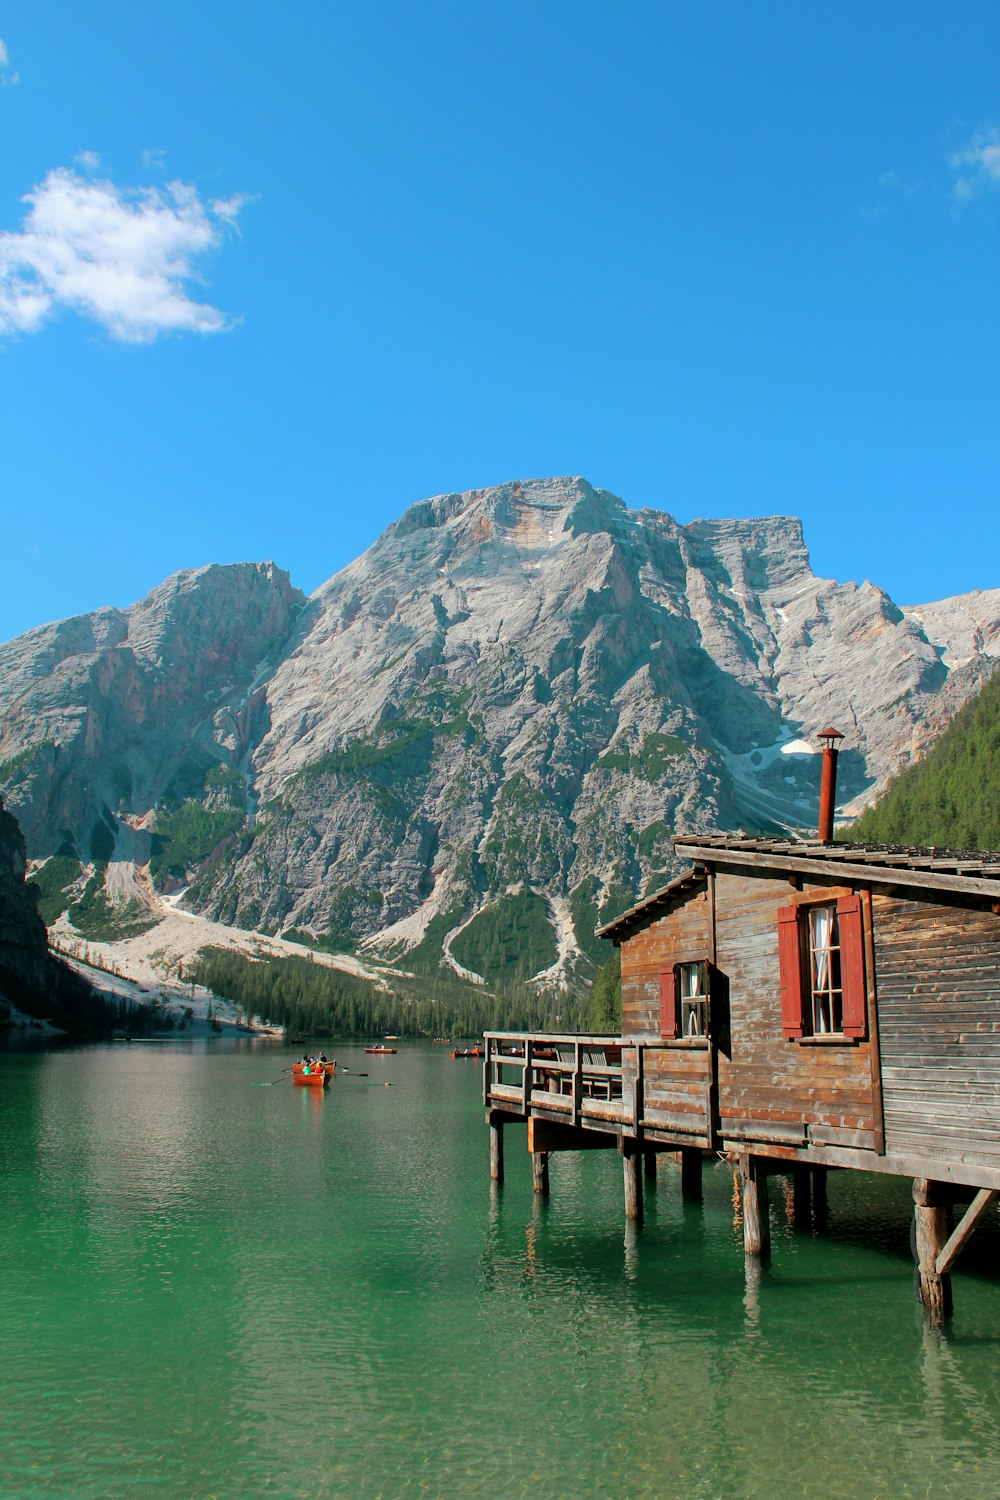 brown wooden house on lake dock near mountain under blue sky during daytime